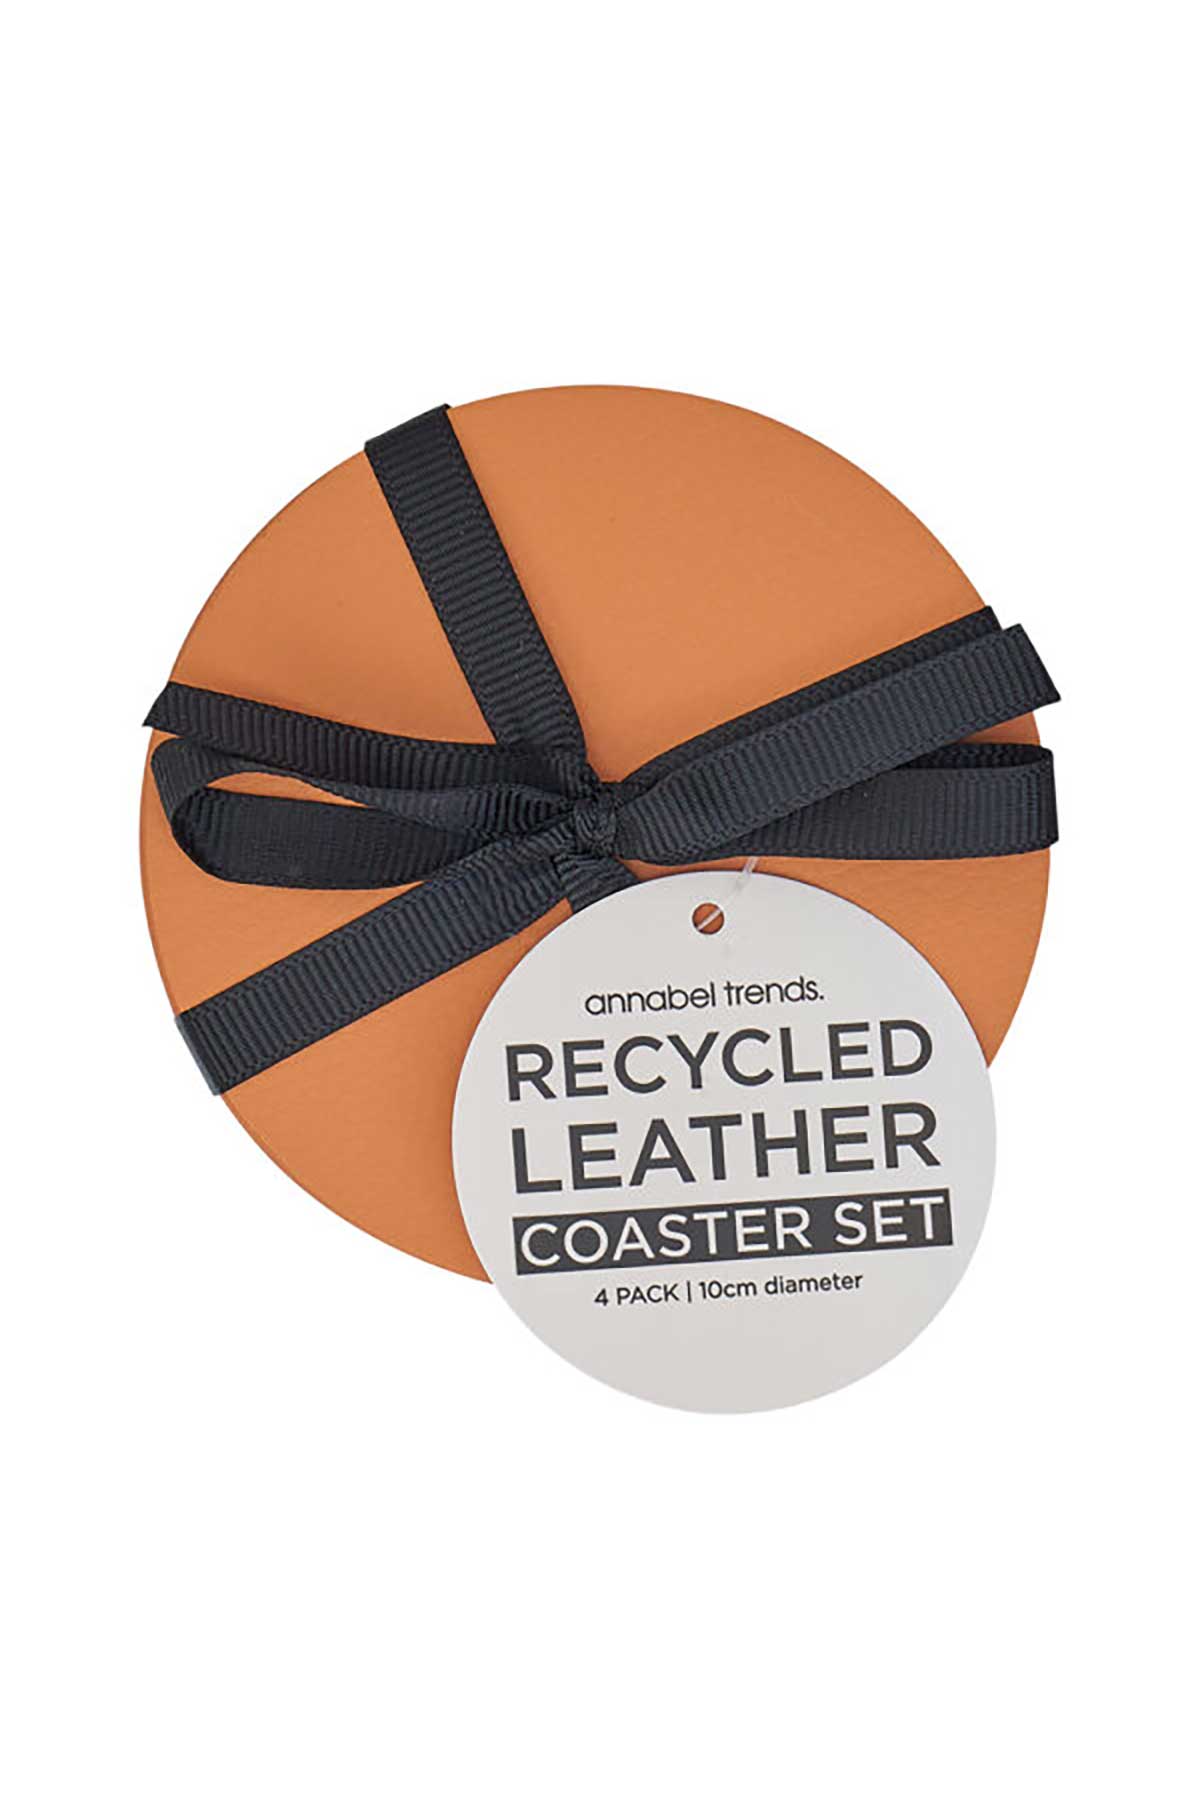 Annabel Trends Recycled Leather Coasters Set of 4 Terracotta